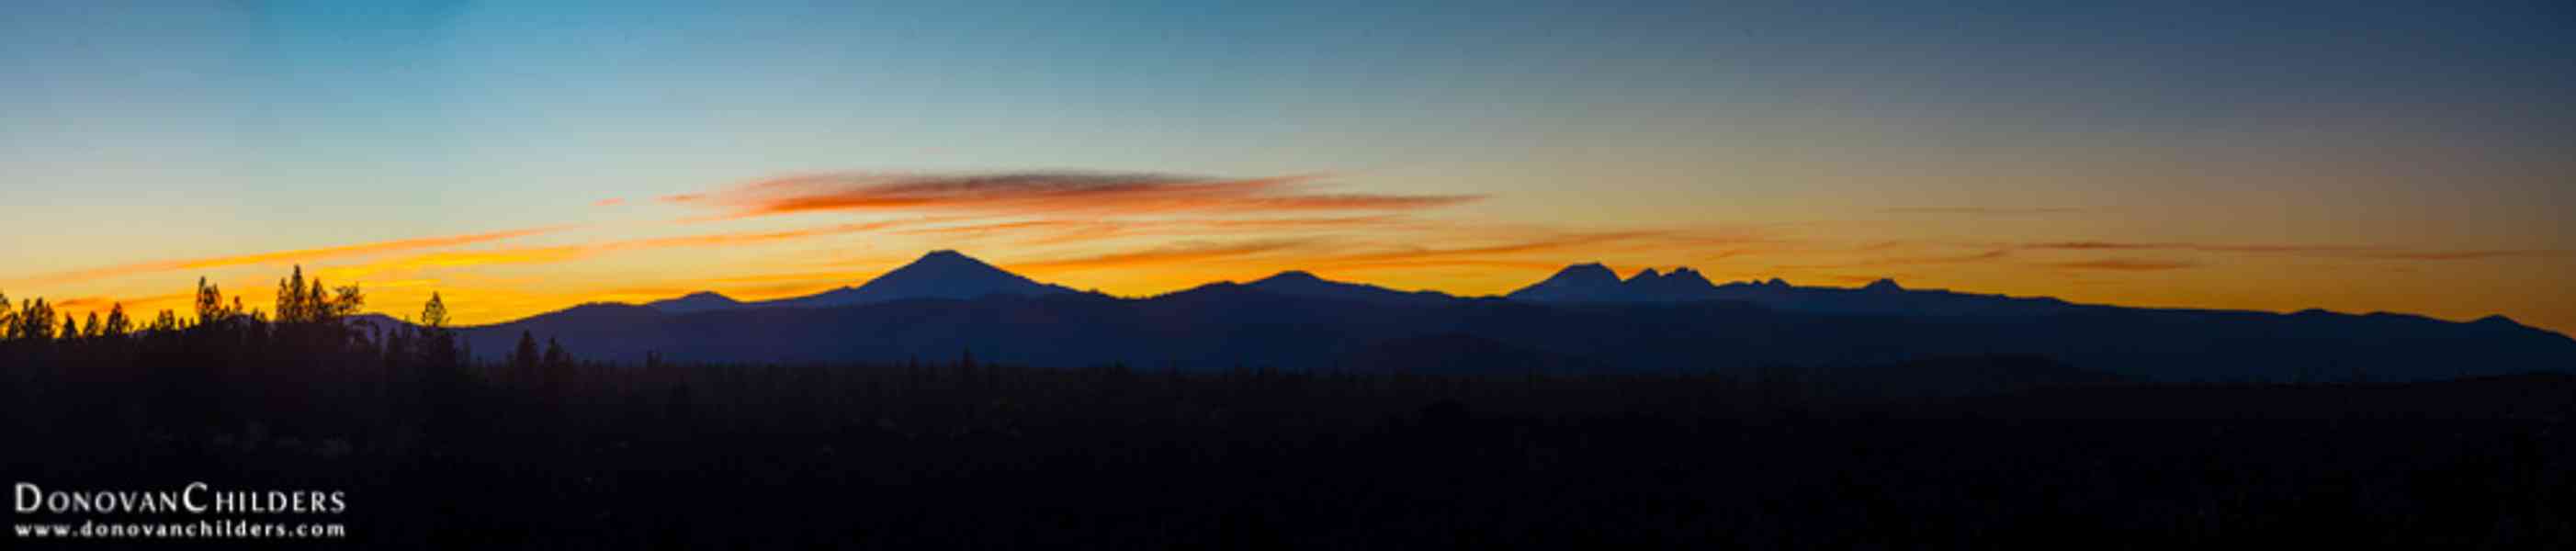 Waiting for the eclipse, our view of the Cascades just after sunset. This is a 13-shot panorama.